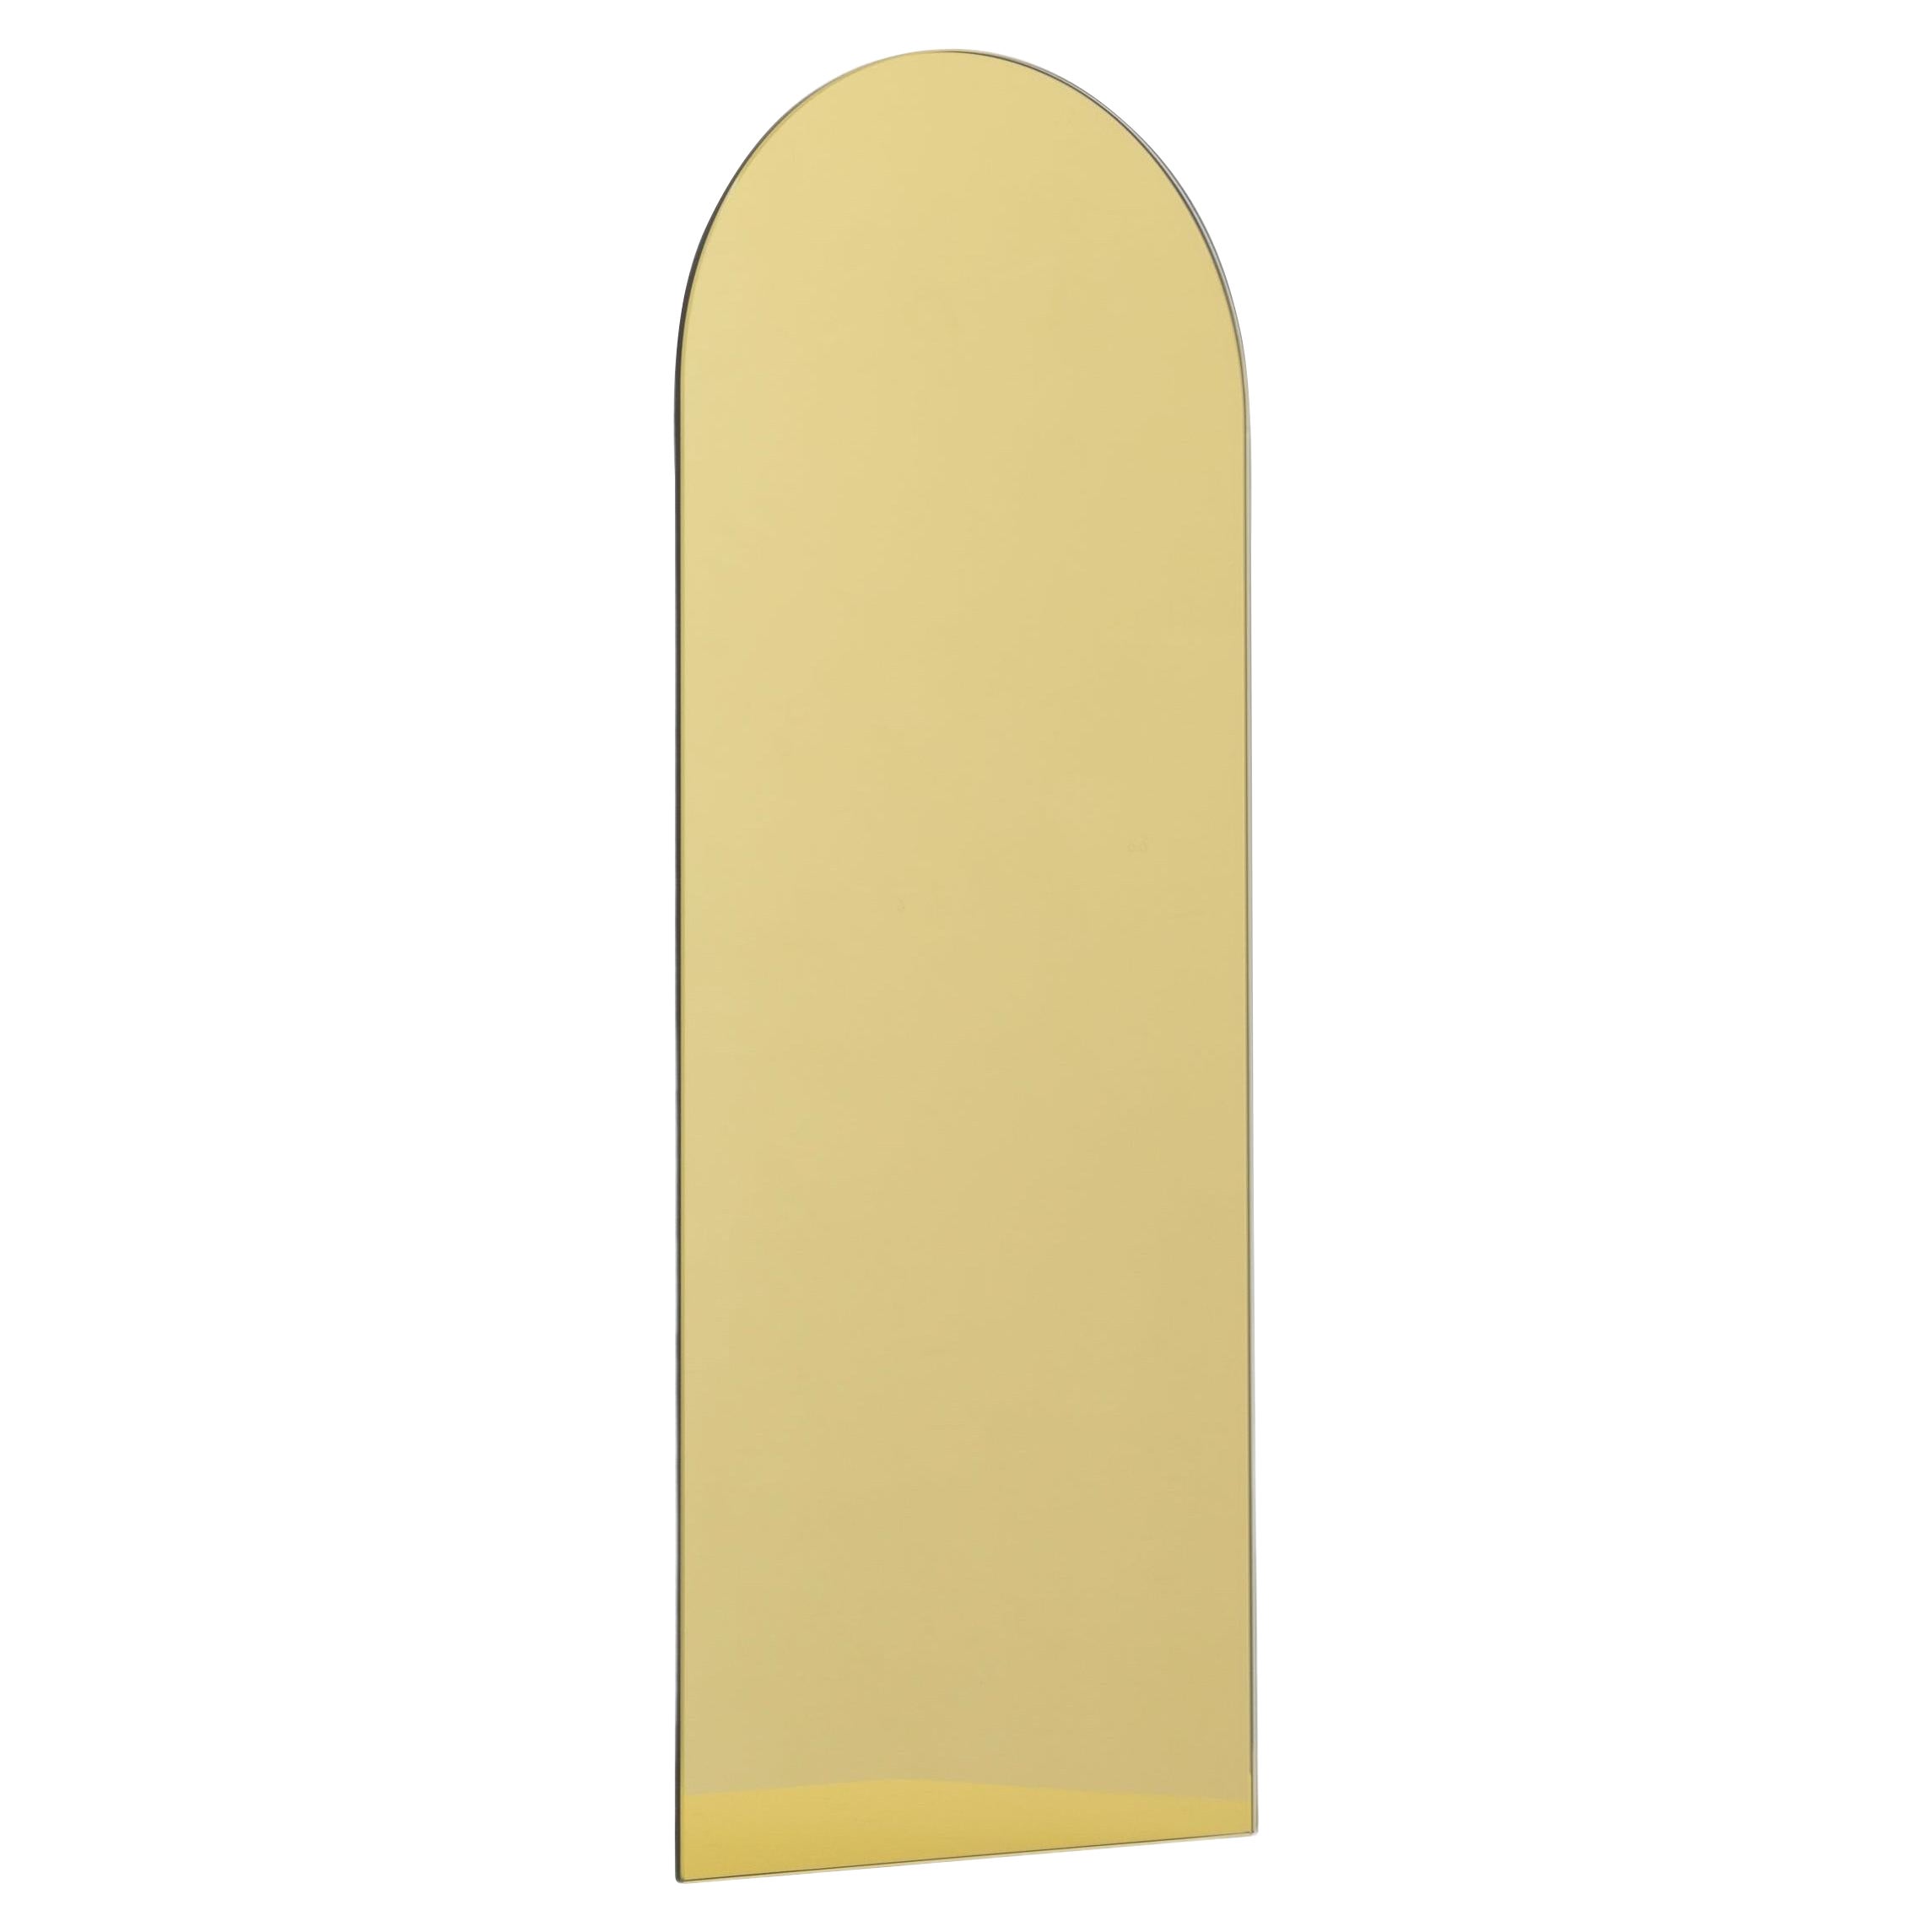 In Stock Arcus Gold Tinted Arched Frameless Contemporary Mirror, Small For Sale